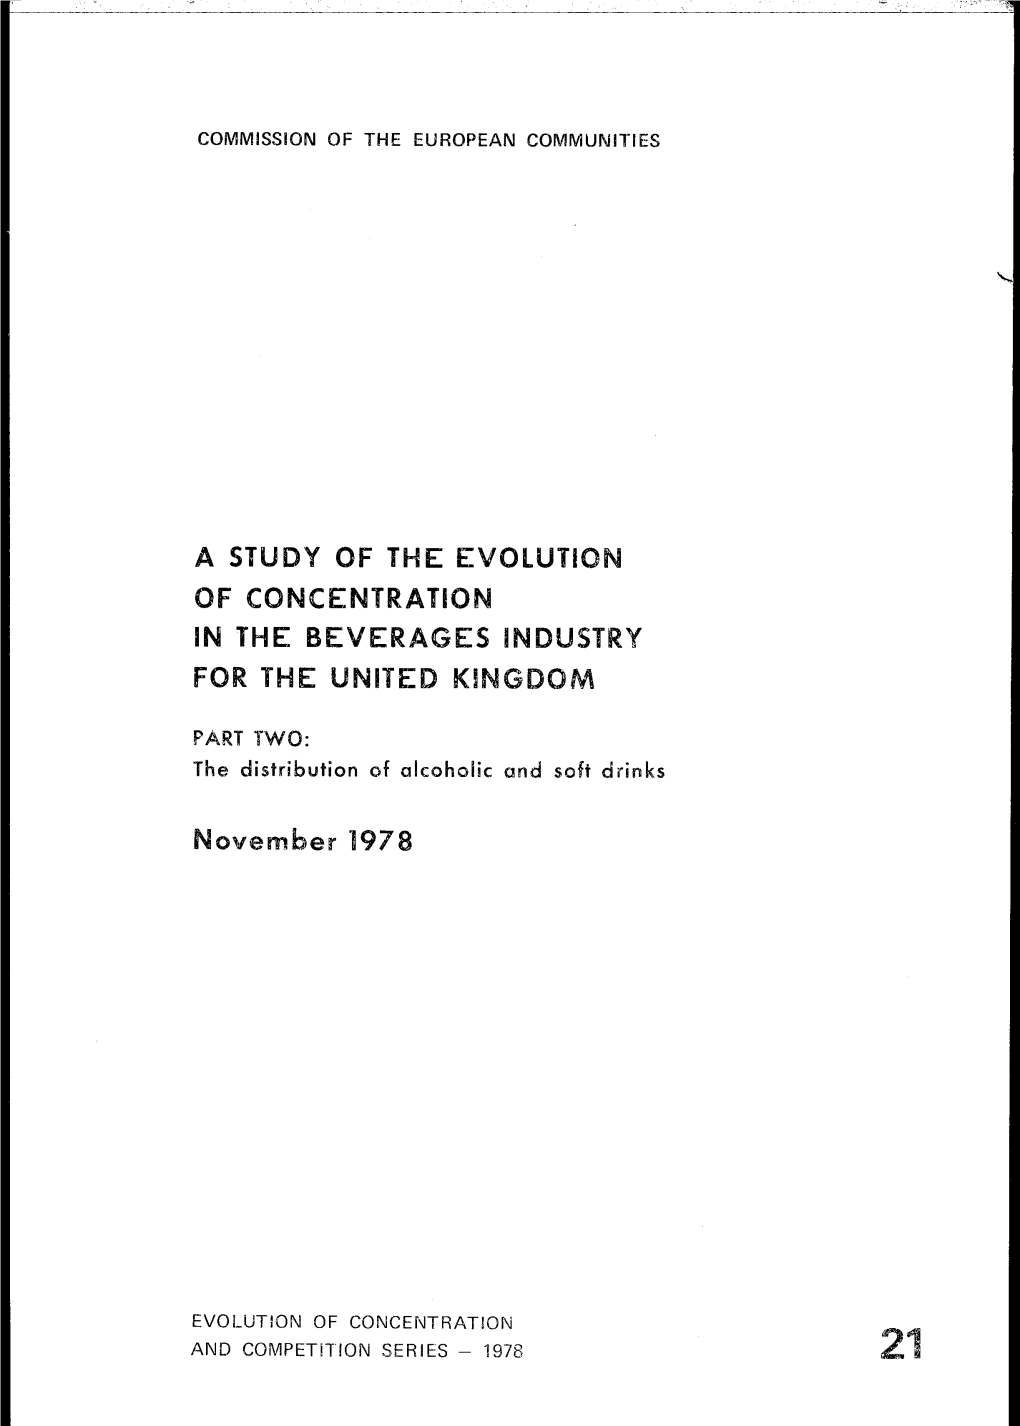 A STUDY of the Evolution for the UNITED KINGDOM November